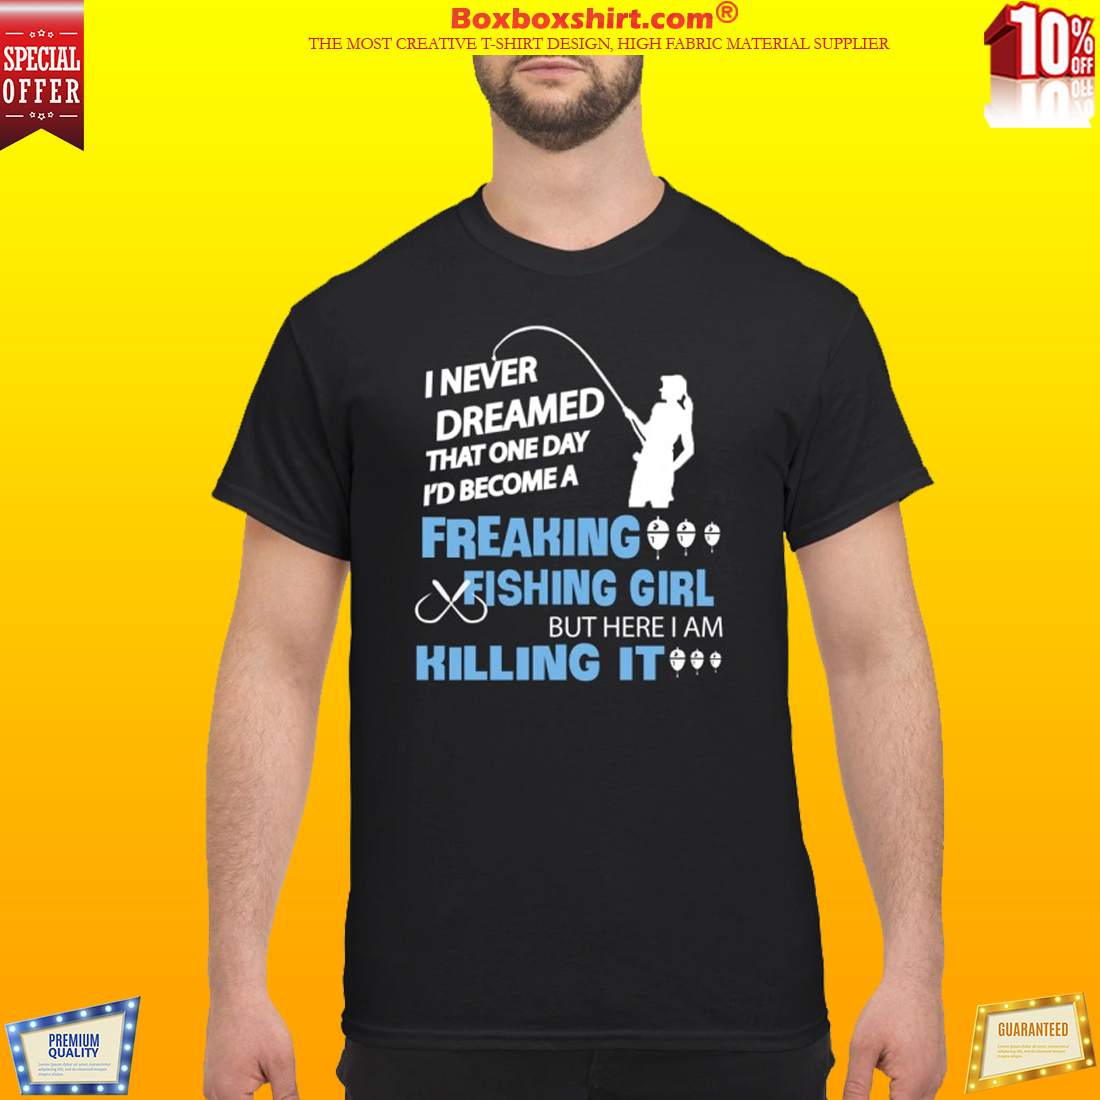 I never dreamed that one day to become freaking fishing girl classic shirt